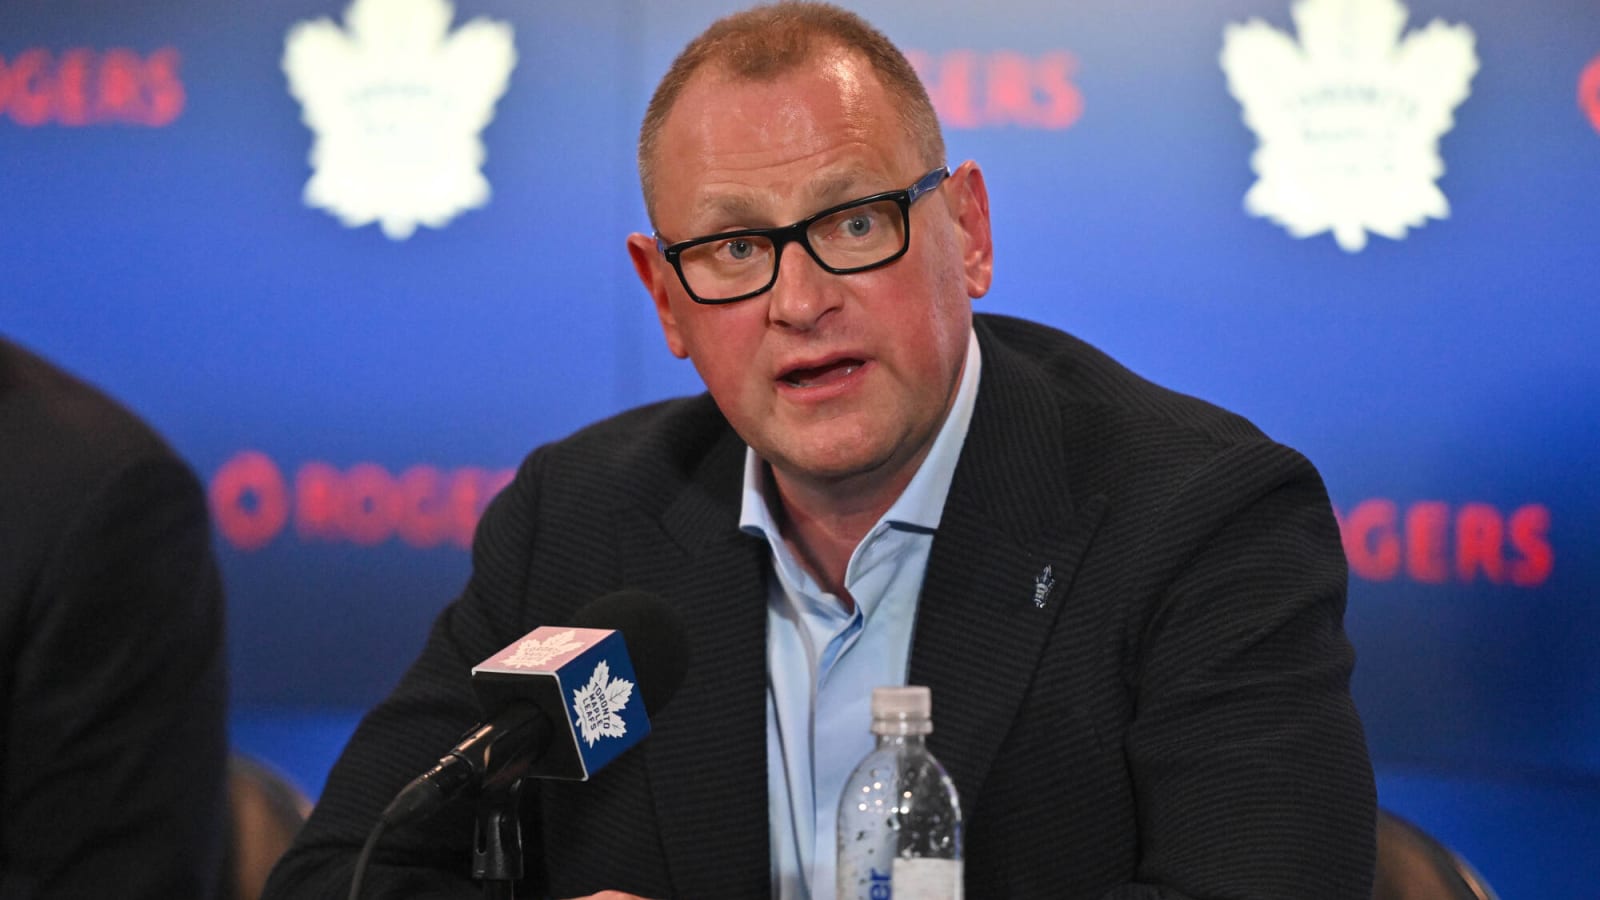 Brad Treliving has set the Maple Leafs up for success this season